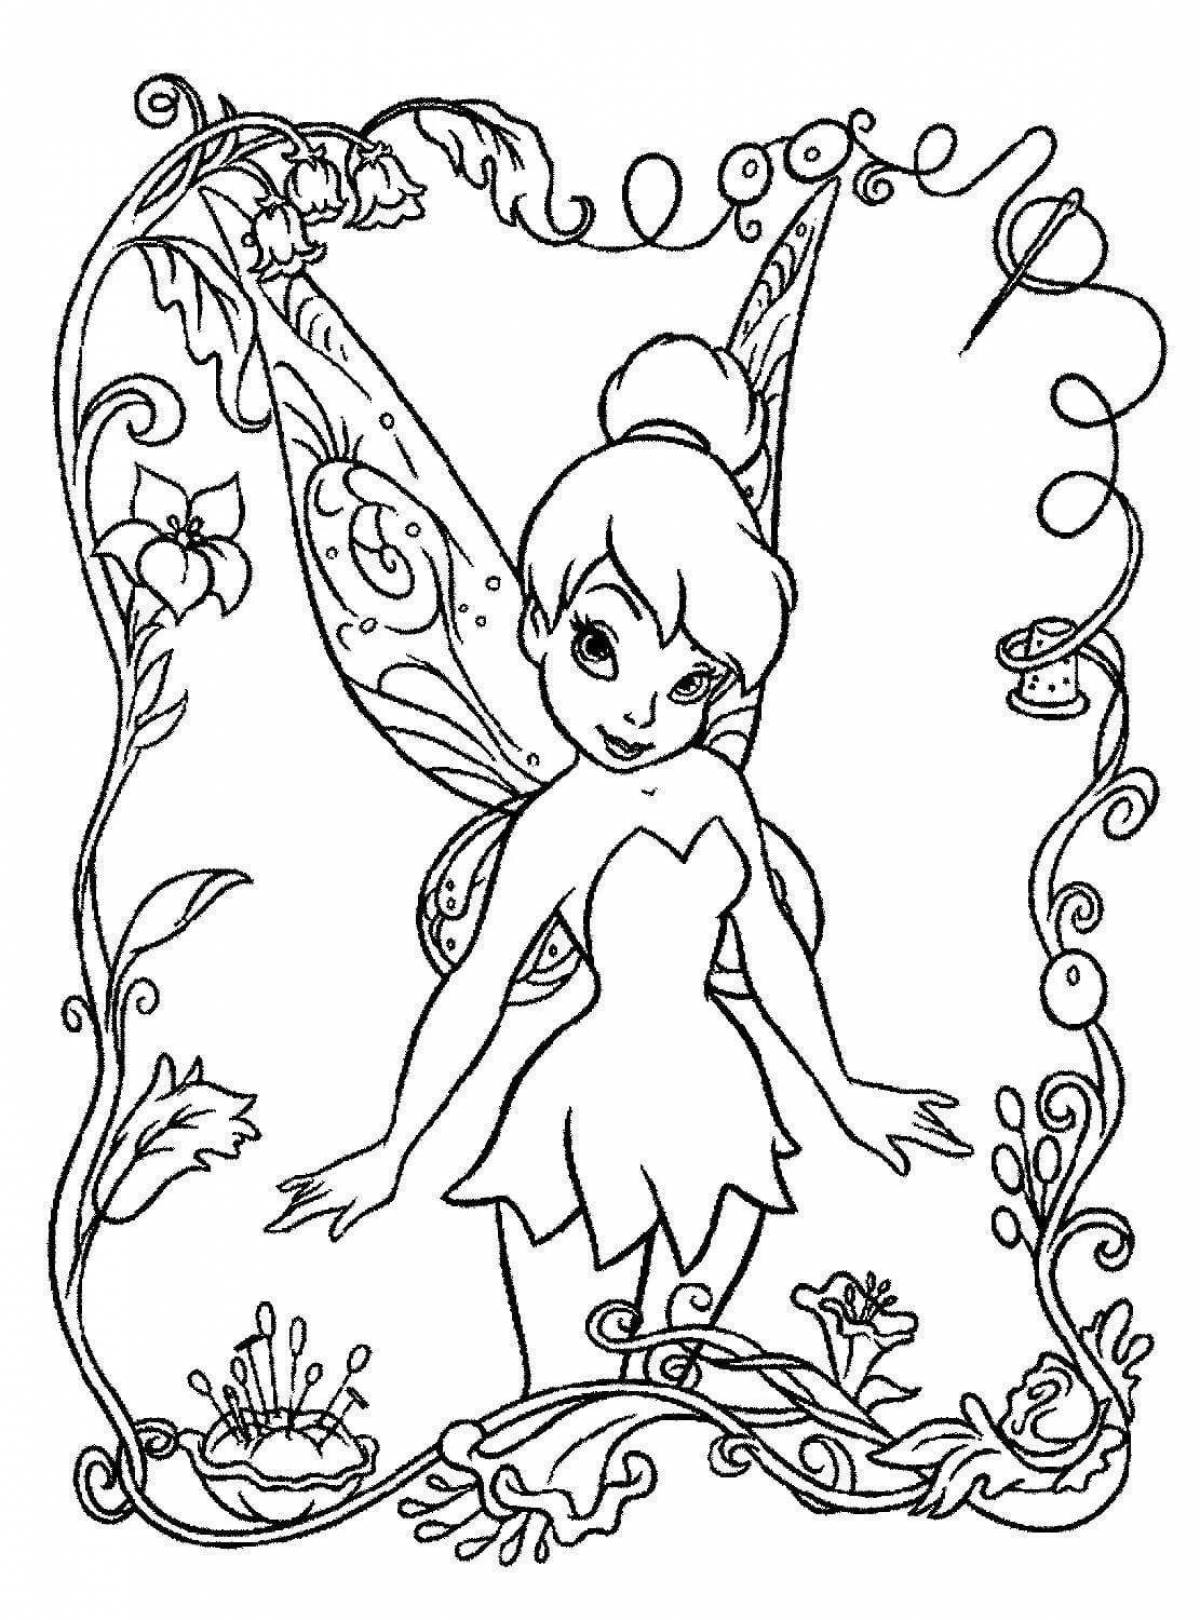 Dazzling fairy coloring pages for kids 5-6 years old